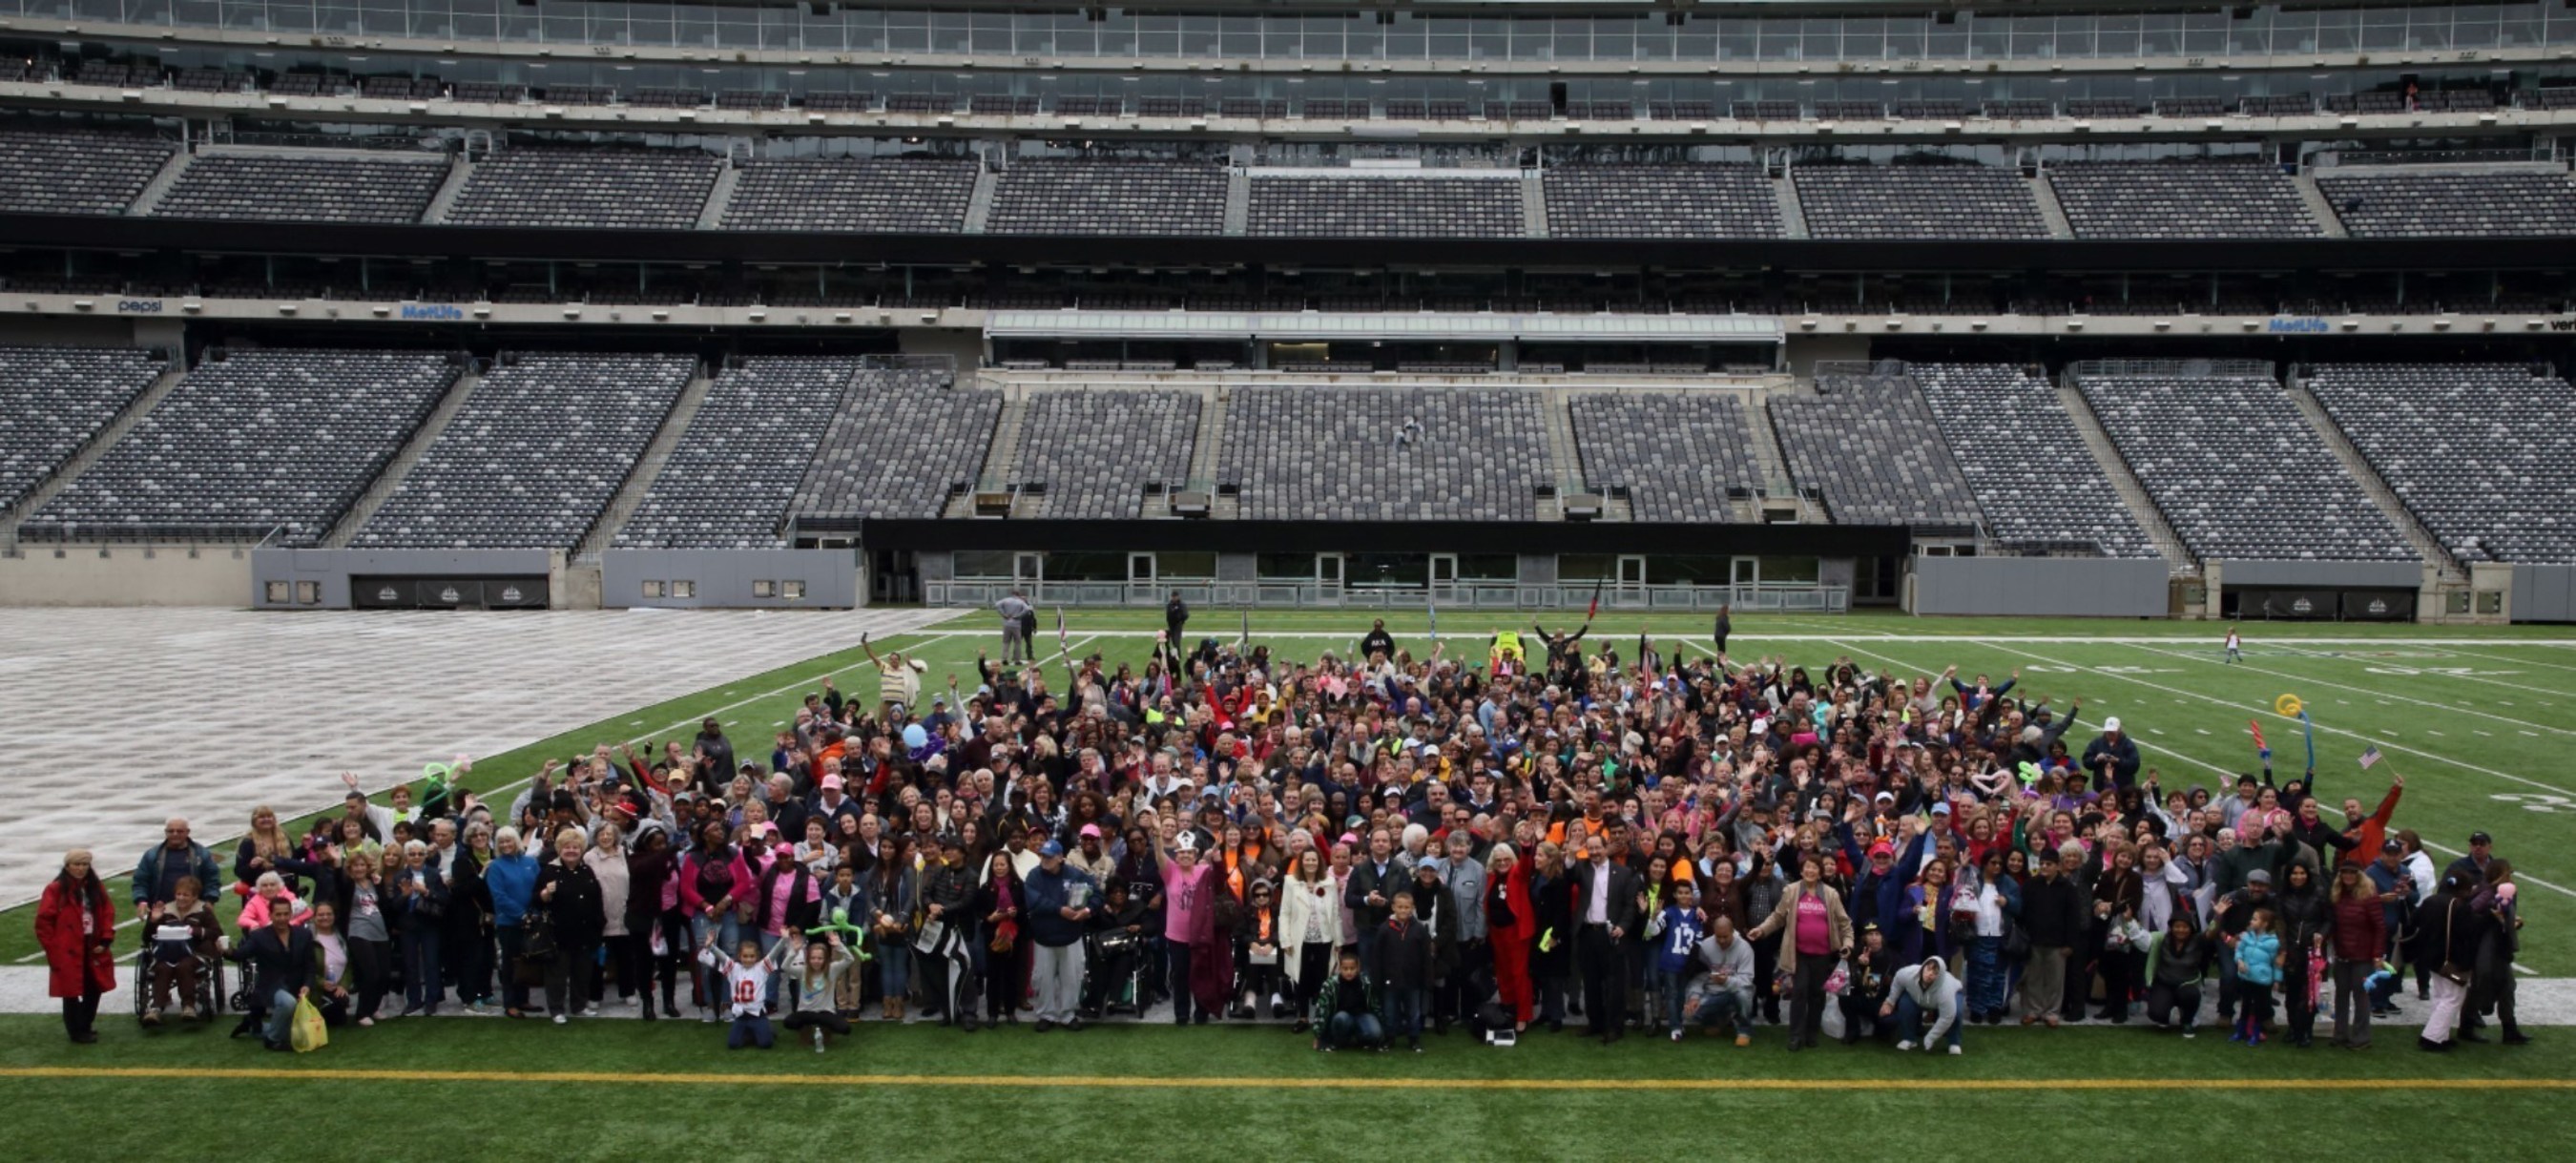 The John Theurer Cancer Center at HackensackUMC celebrated with nearly 4,000 cancer survivors, patients, families and supporters at the Eighth Annual Celebrating Life and Liberty Event on Sunday, October 9, at MetLife Stadium. The crowd gathers on the 50-yard line for the event's highest attendance to date.